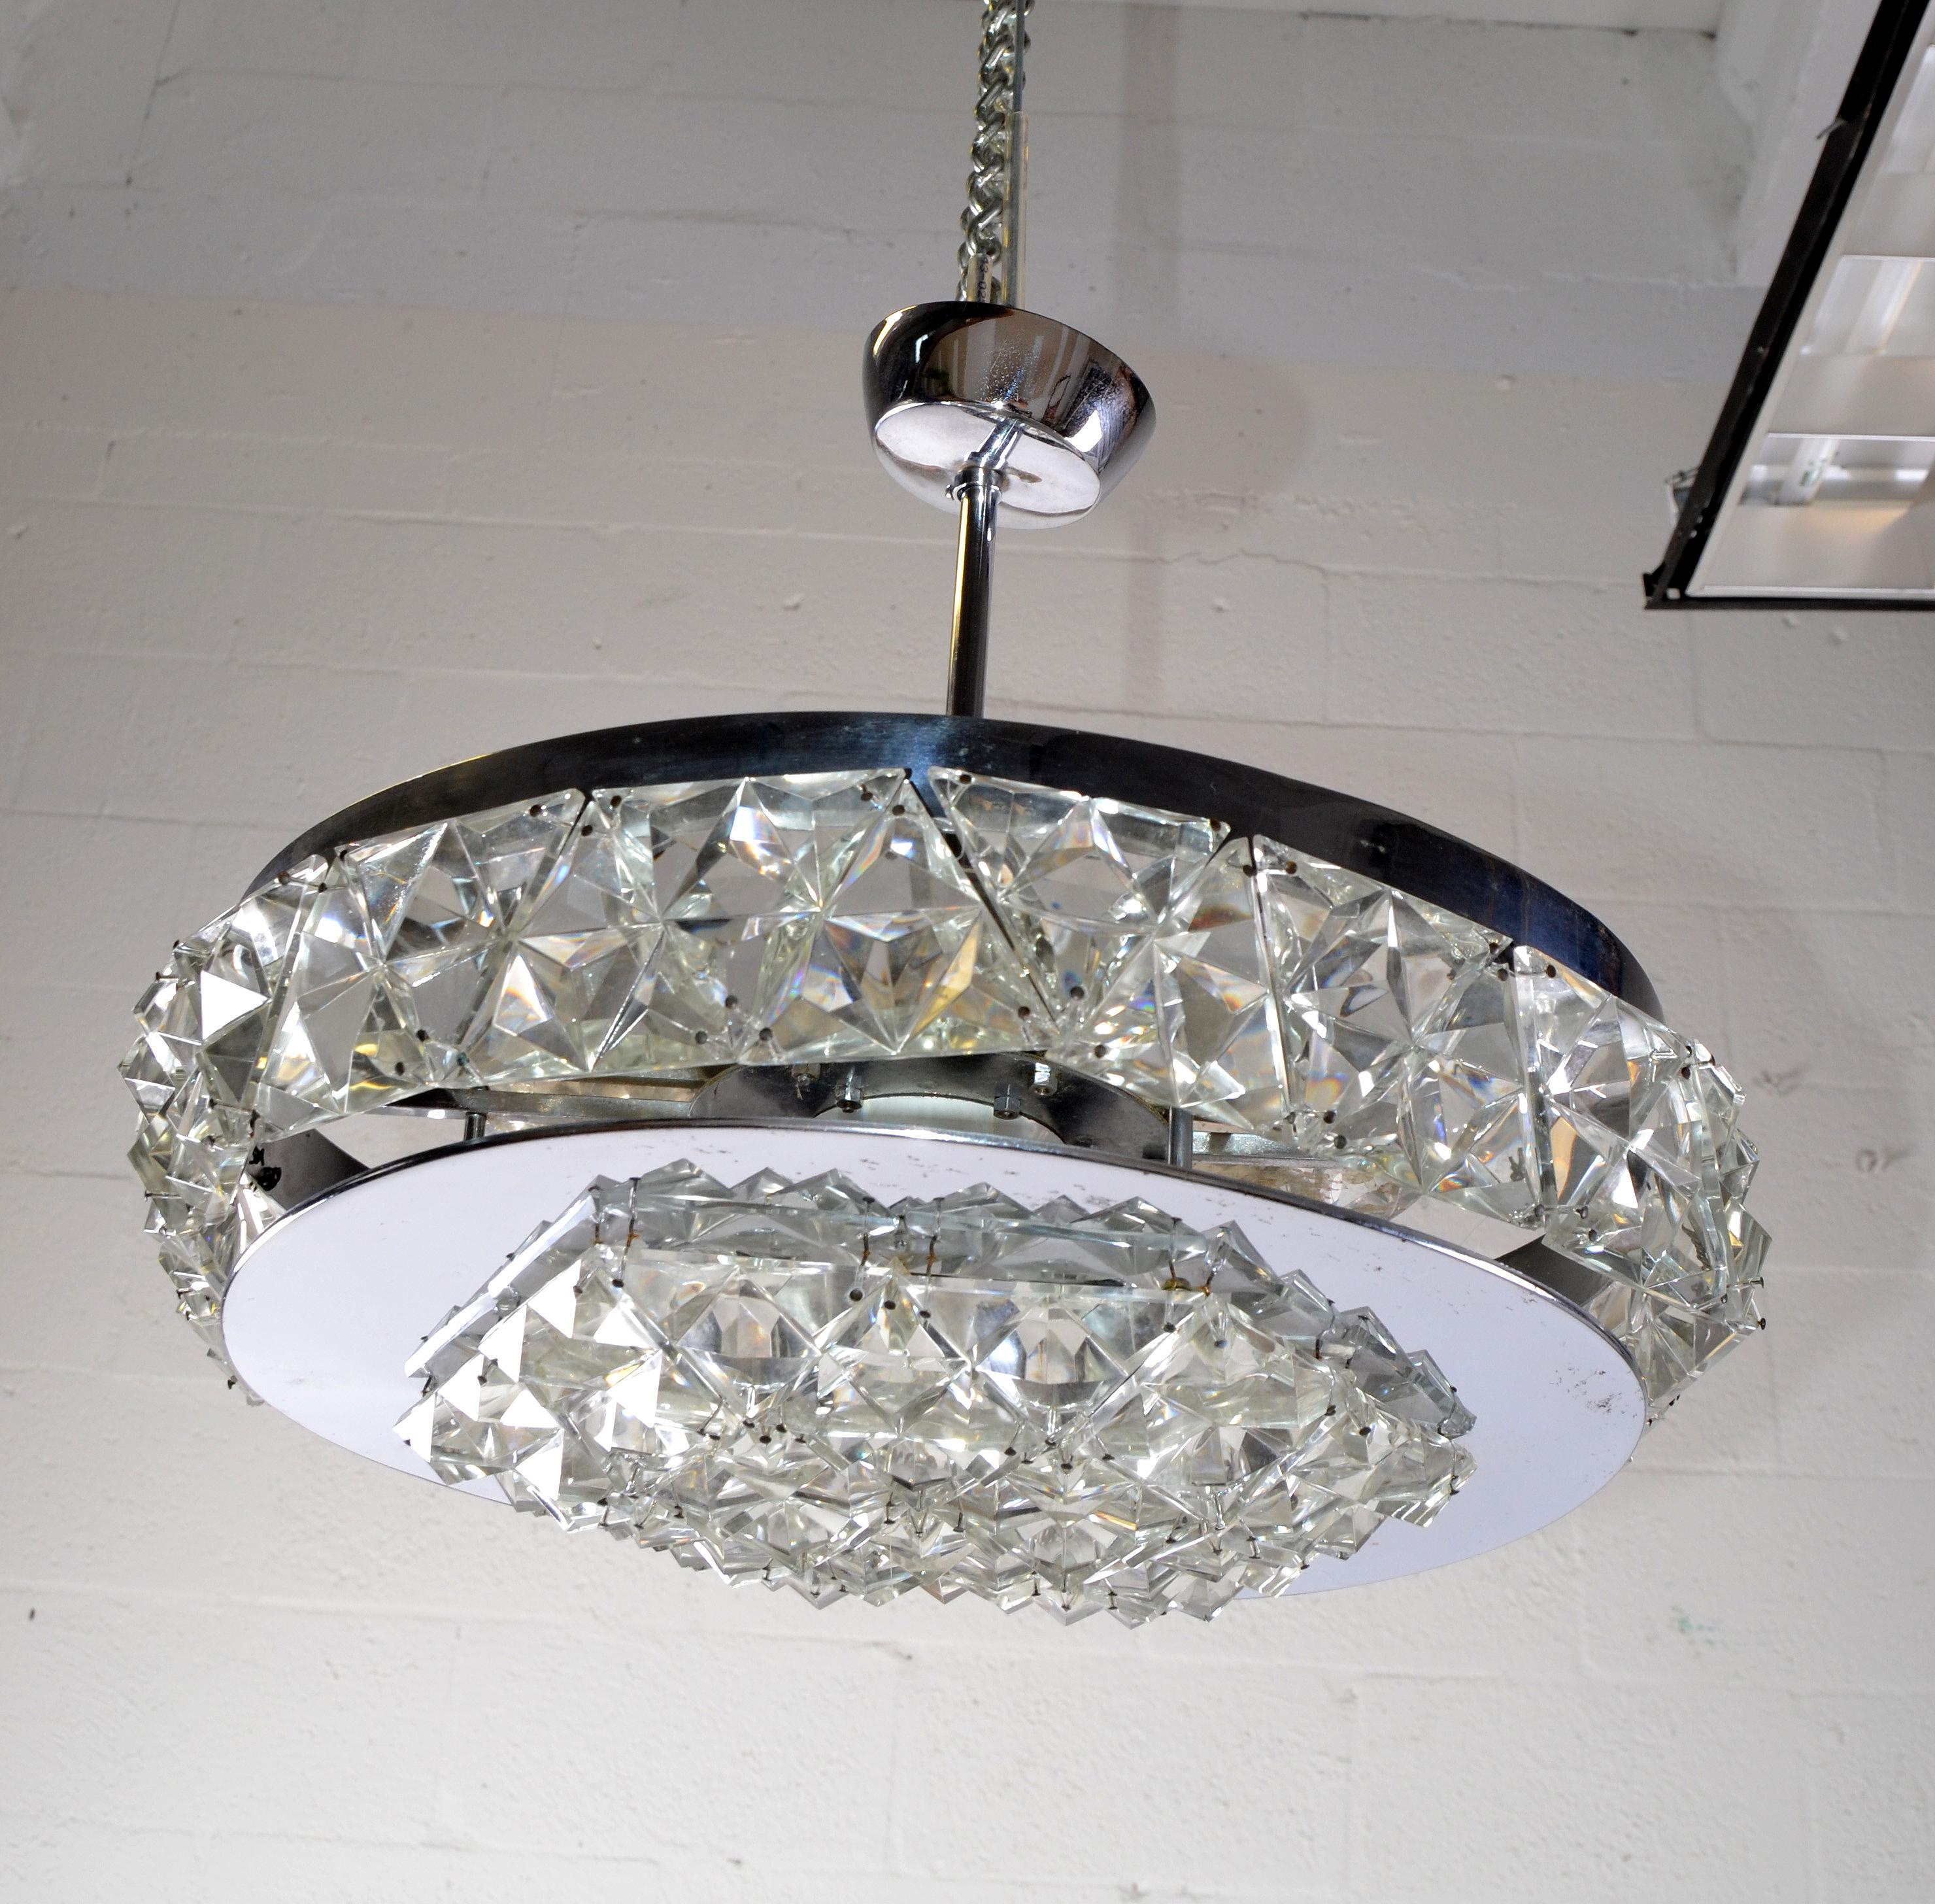 Mid-Century Modern Chrome and Crystal Flushmount Ceiling Light Fixture, 1970s For Sale 6